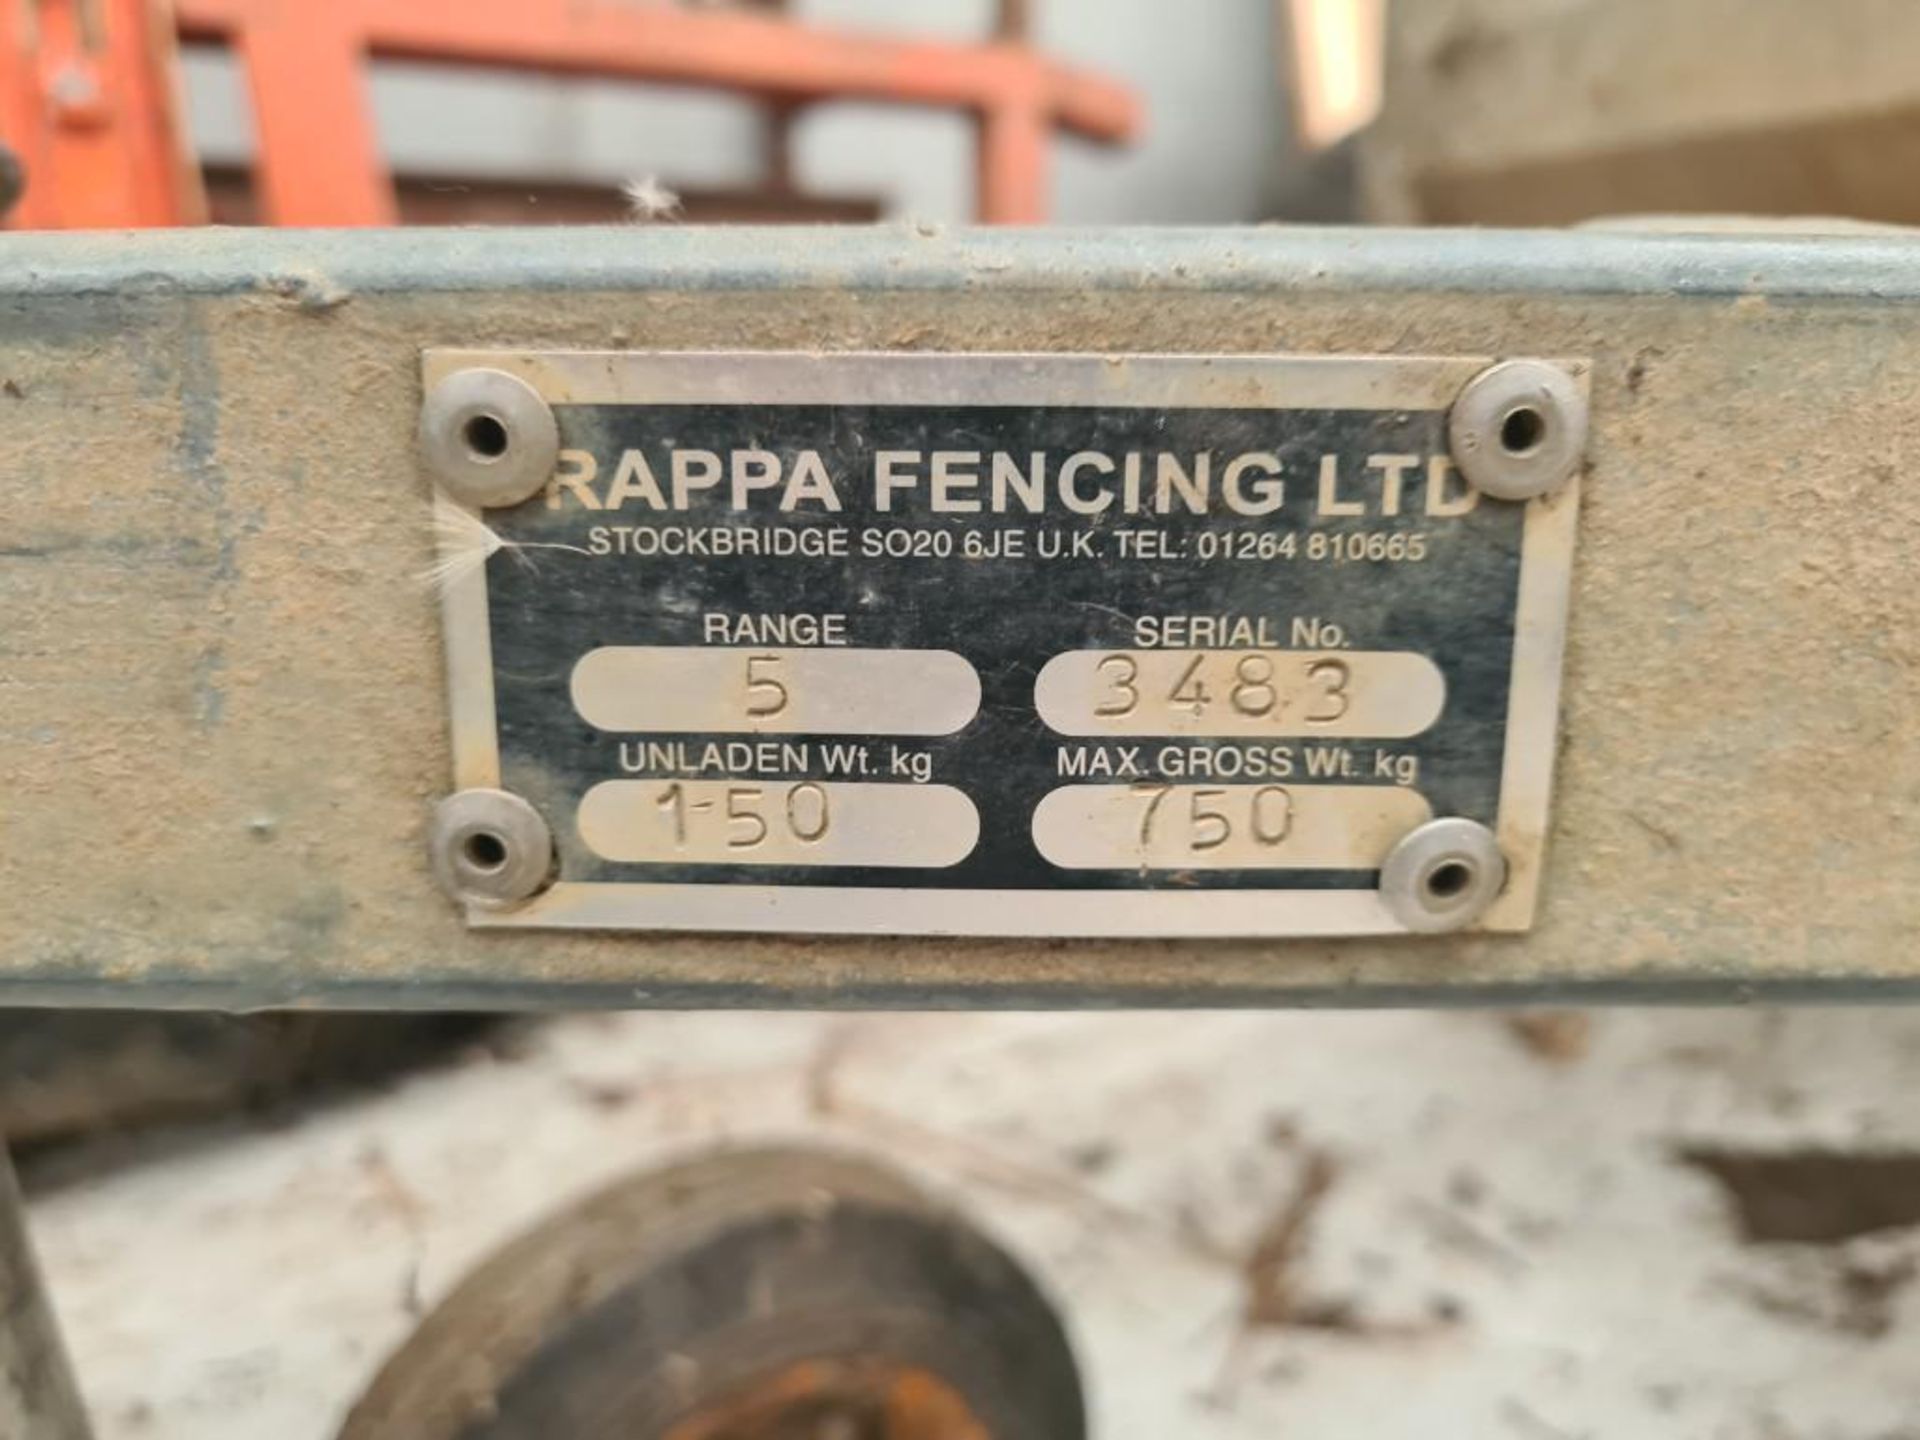 Rappa fencing trailer with electrical fencing equipment - Image 2 of 4